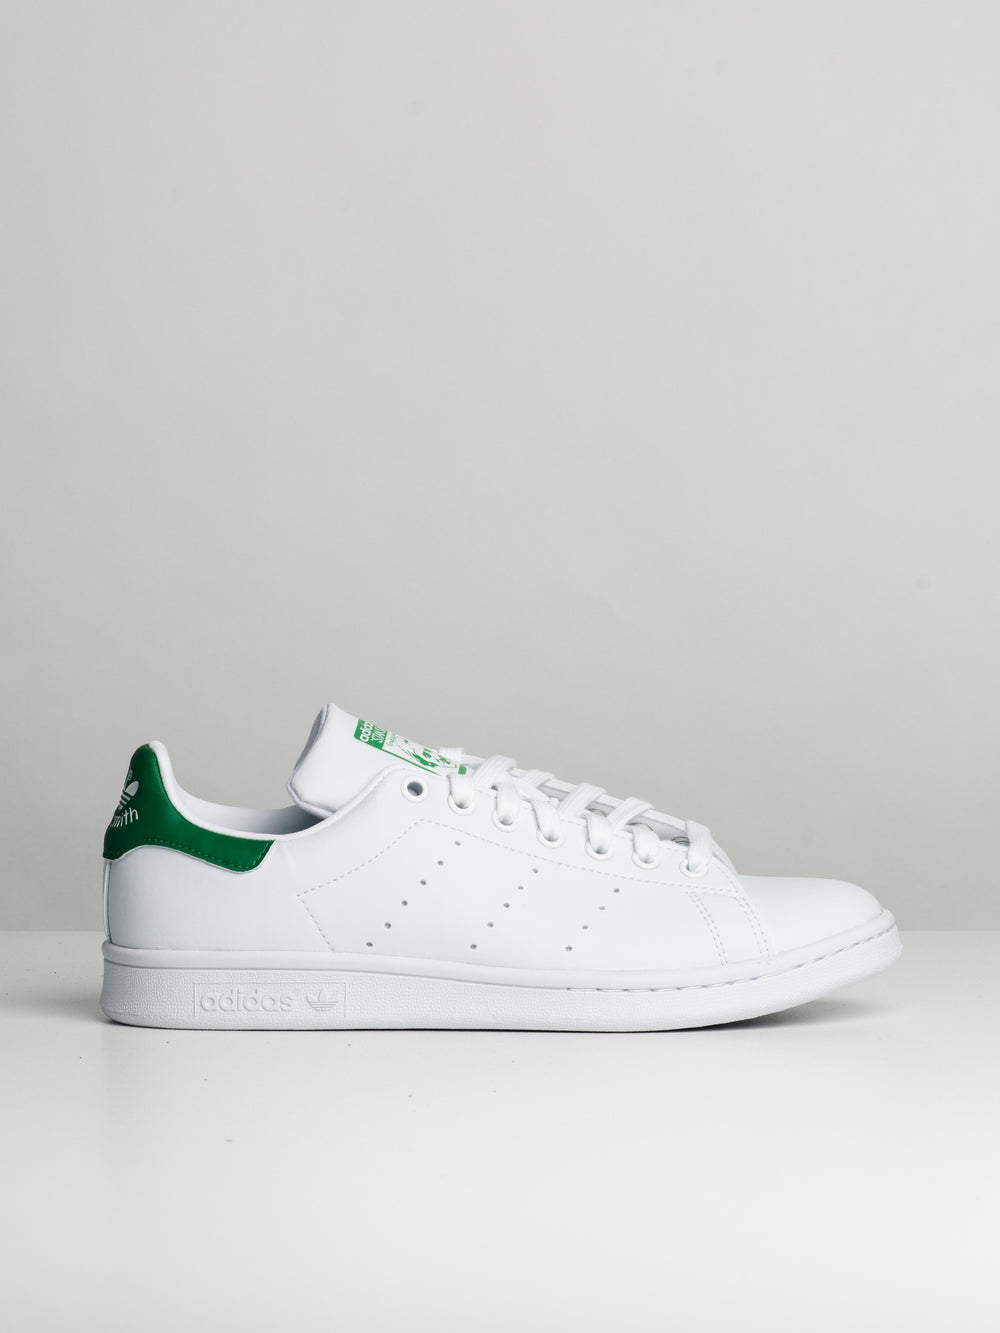 MENS ADIDAS STAN SMITH SNEAKERS - CLEARANCE